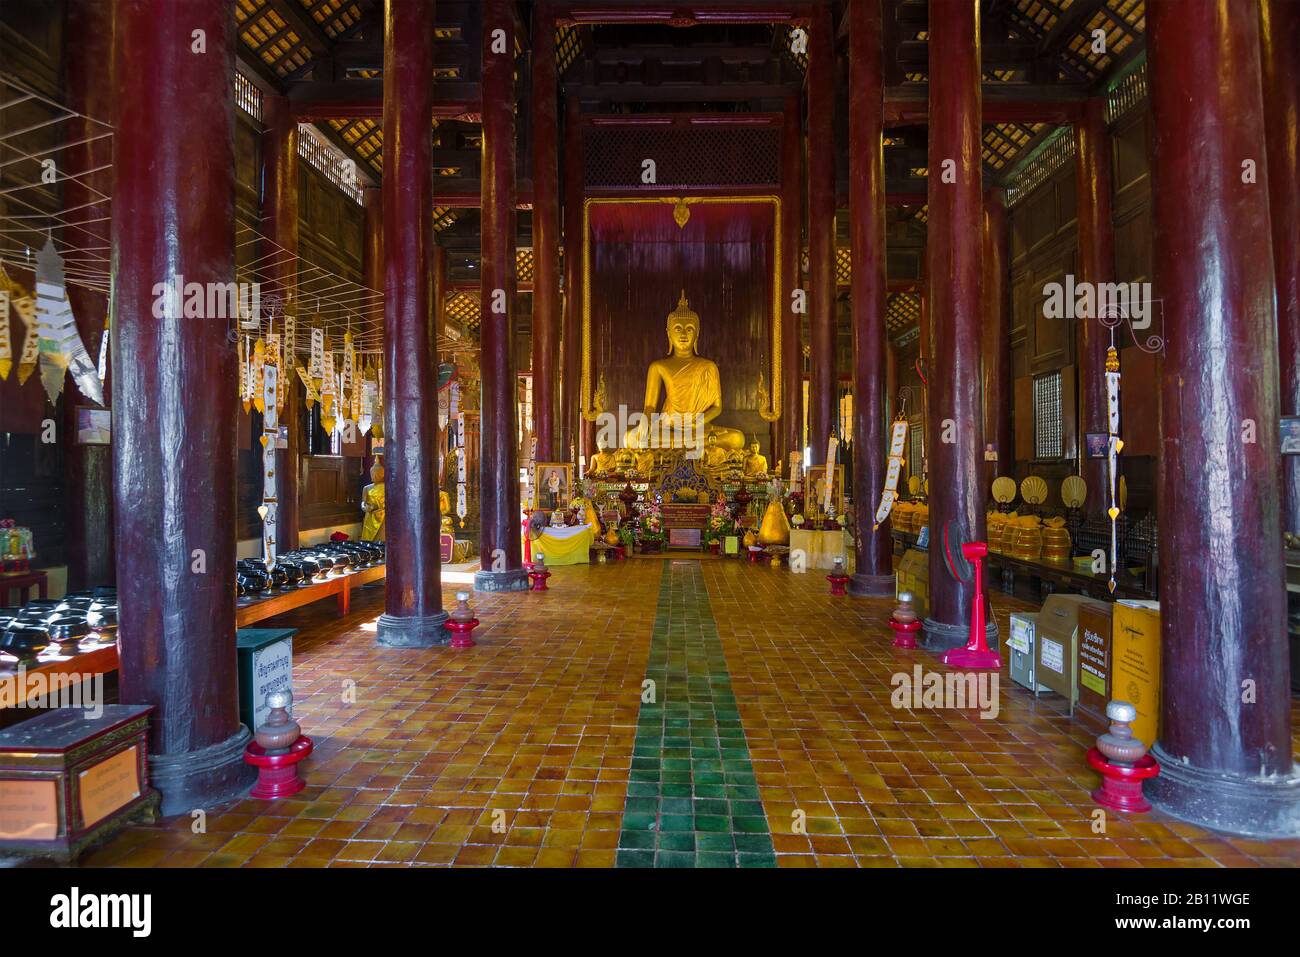 CHIANG MAY, THAILAND - DECEMBER 19, 2018: Interior of the ancient Buddhist wooden temple of Wat Pantao Stock Photo